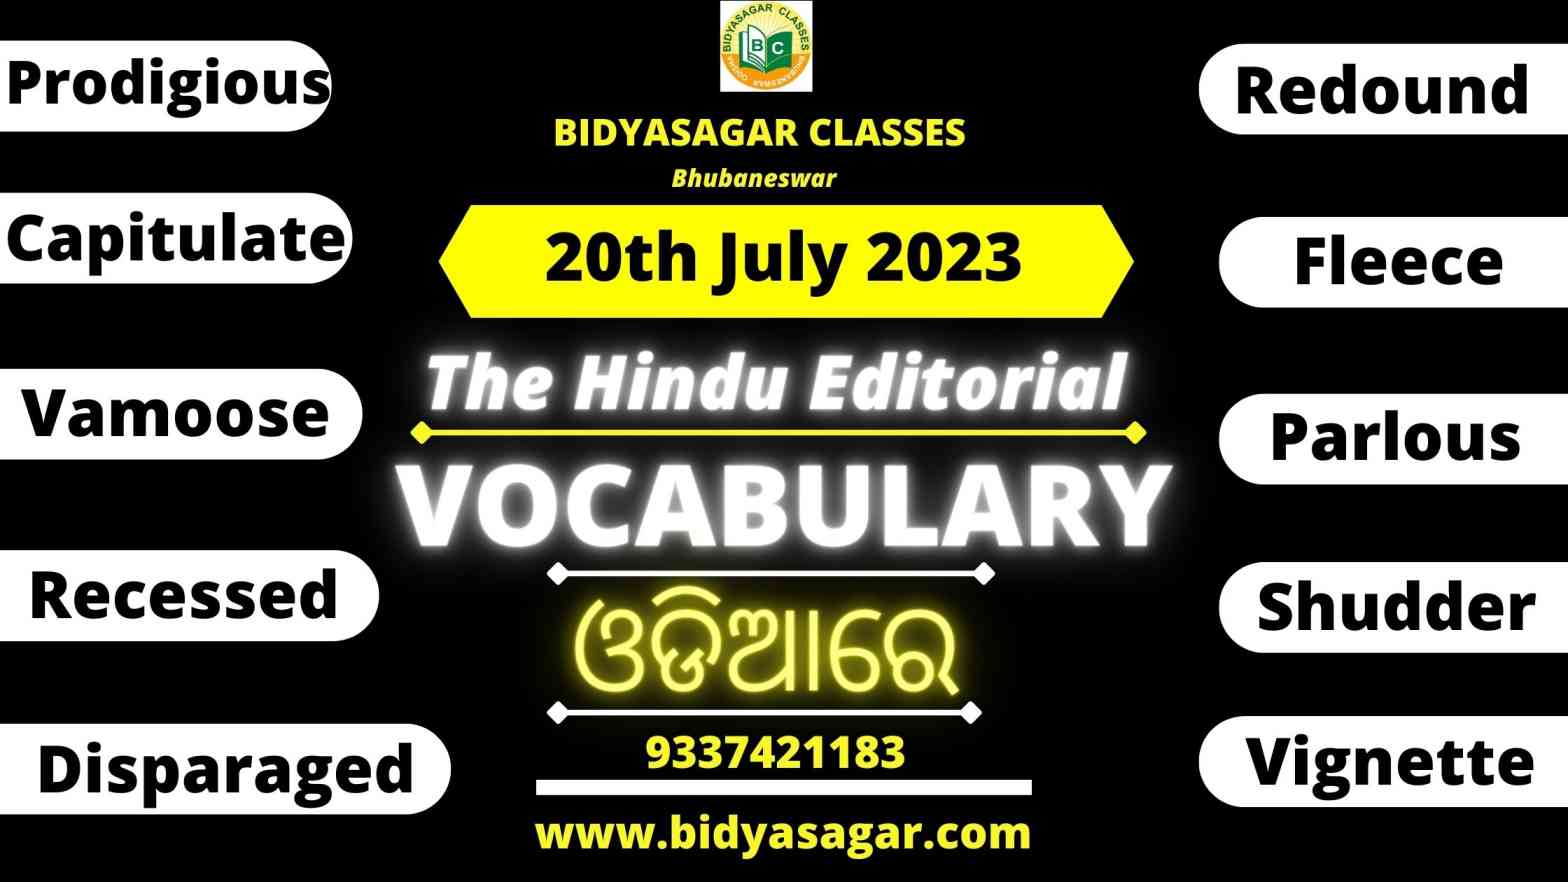 The Hindu Editorial Vocabulary of 20th July 2023